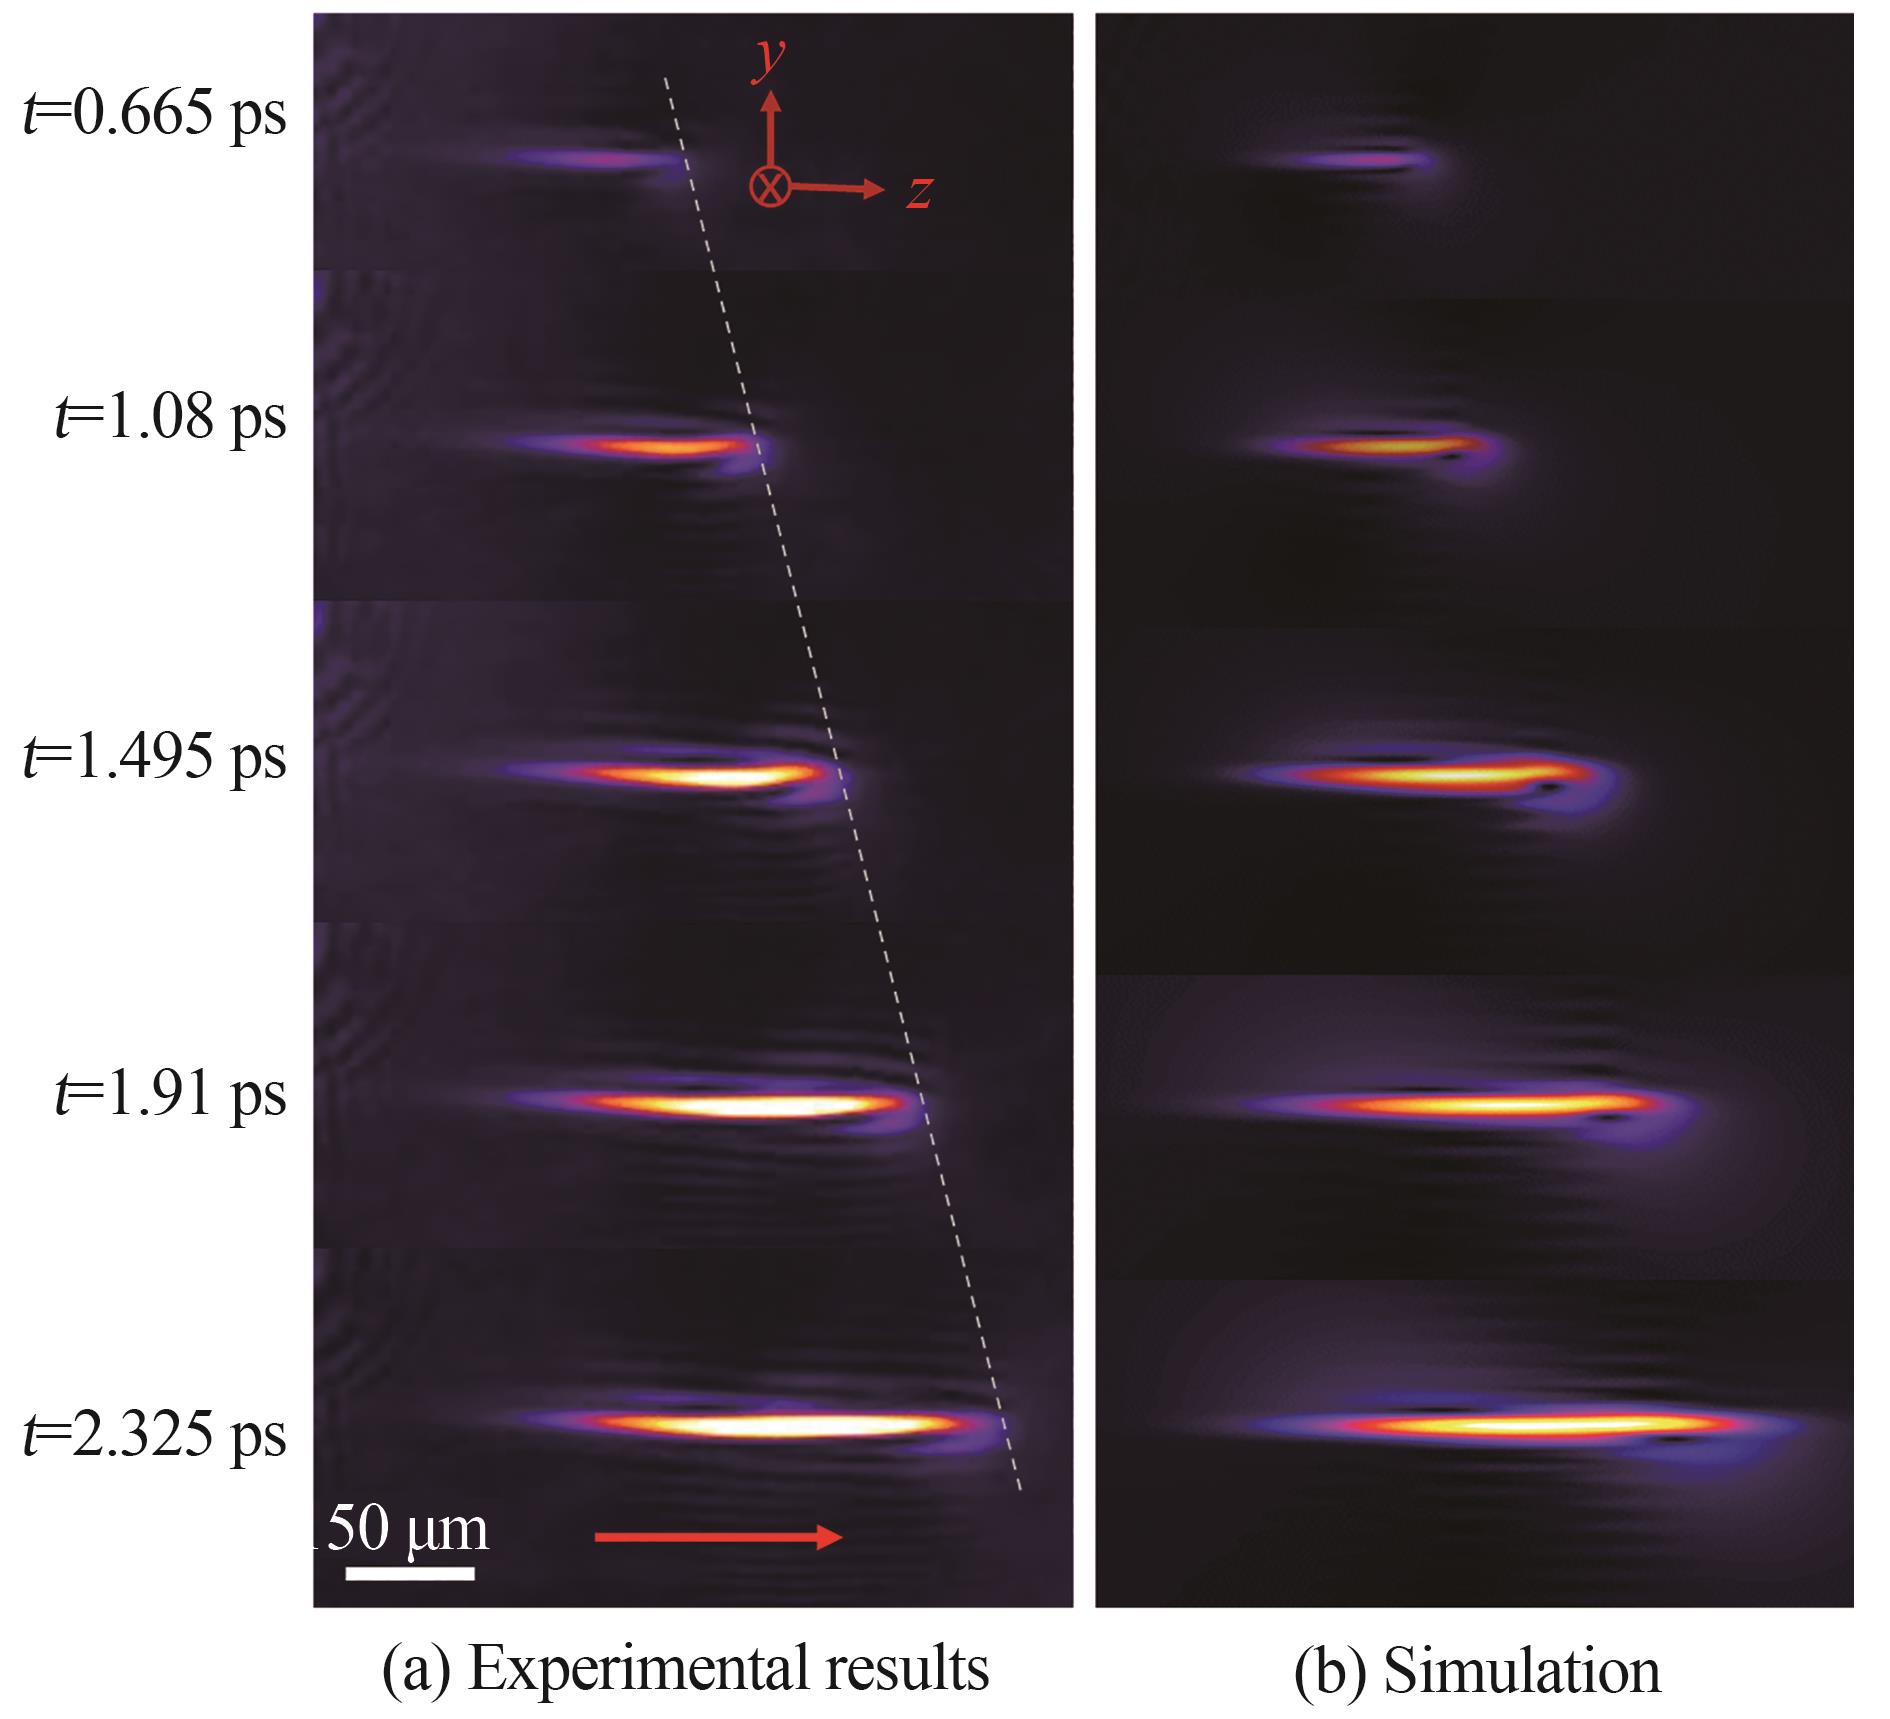 Experimental and simulation images of air plasma generation